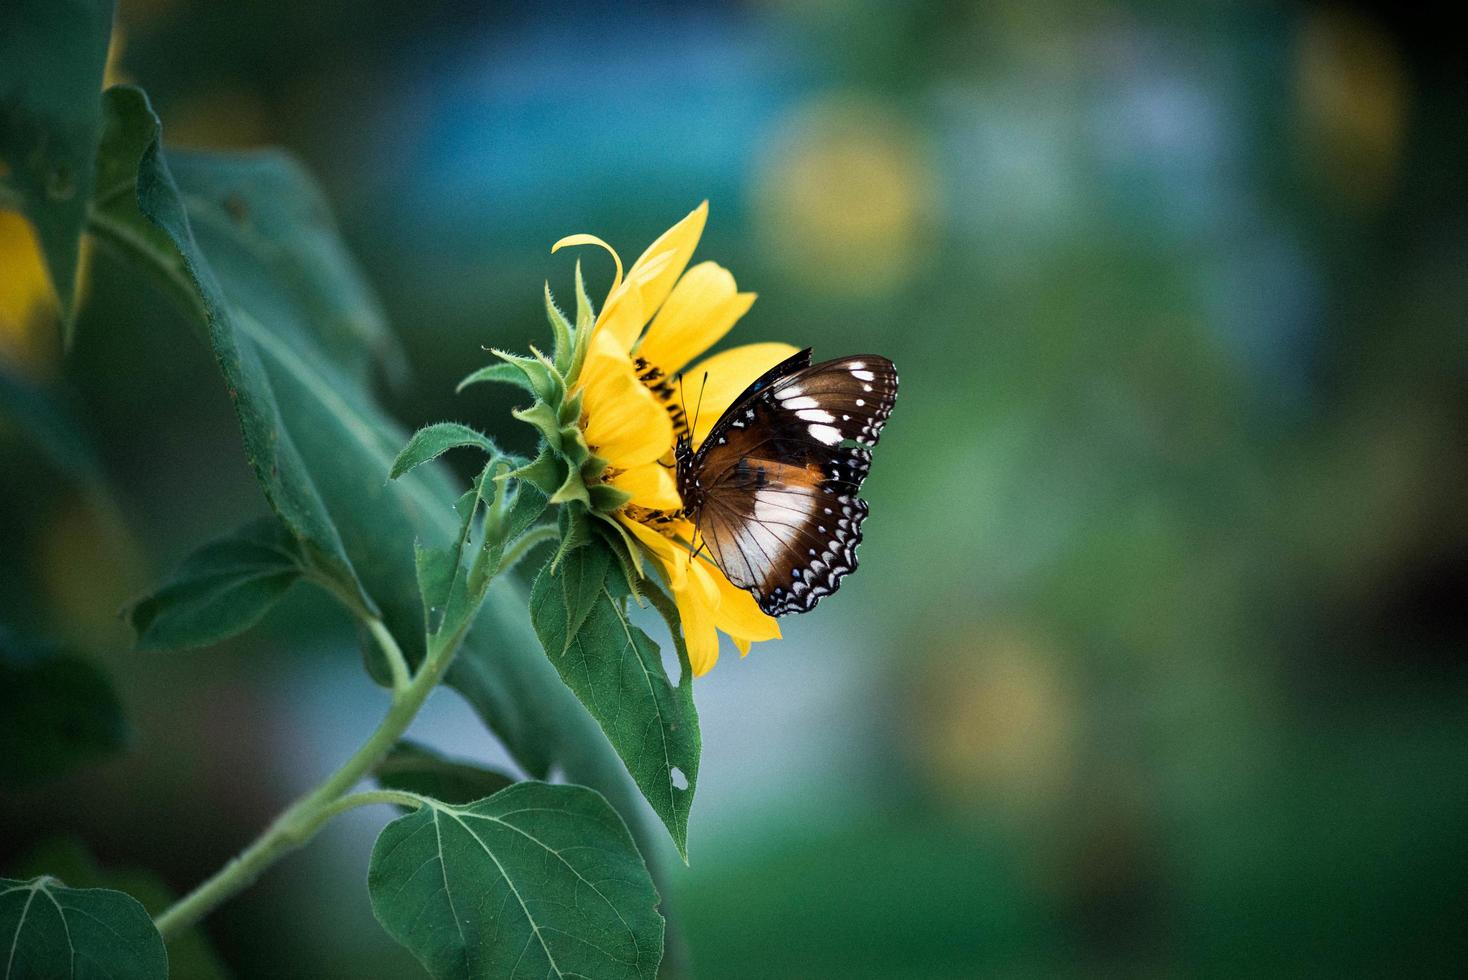 Butterfly on sunflower photo